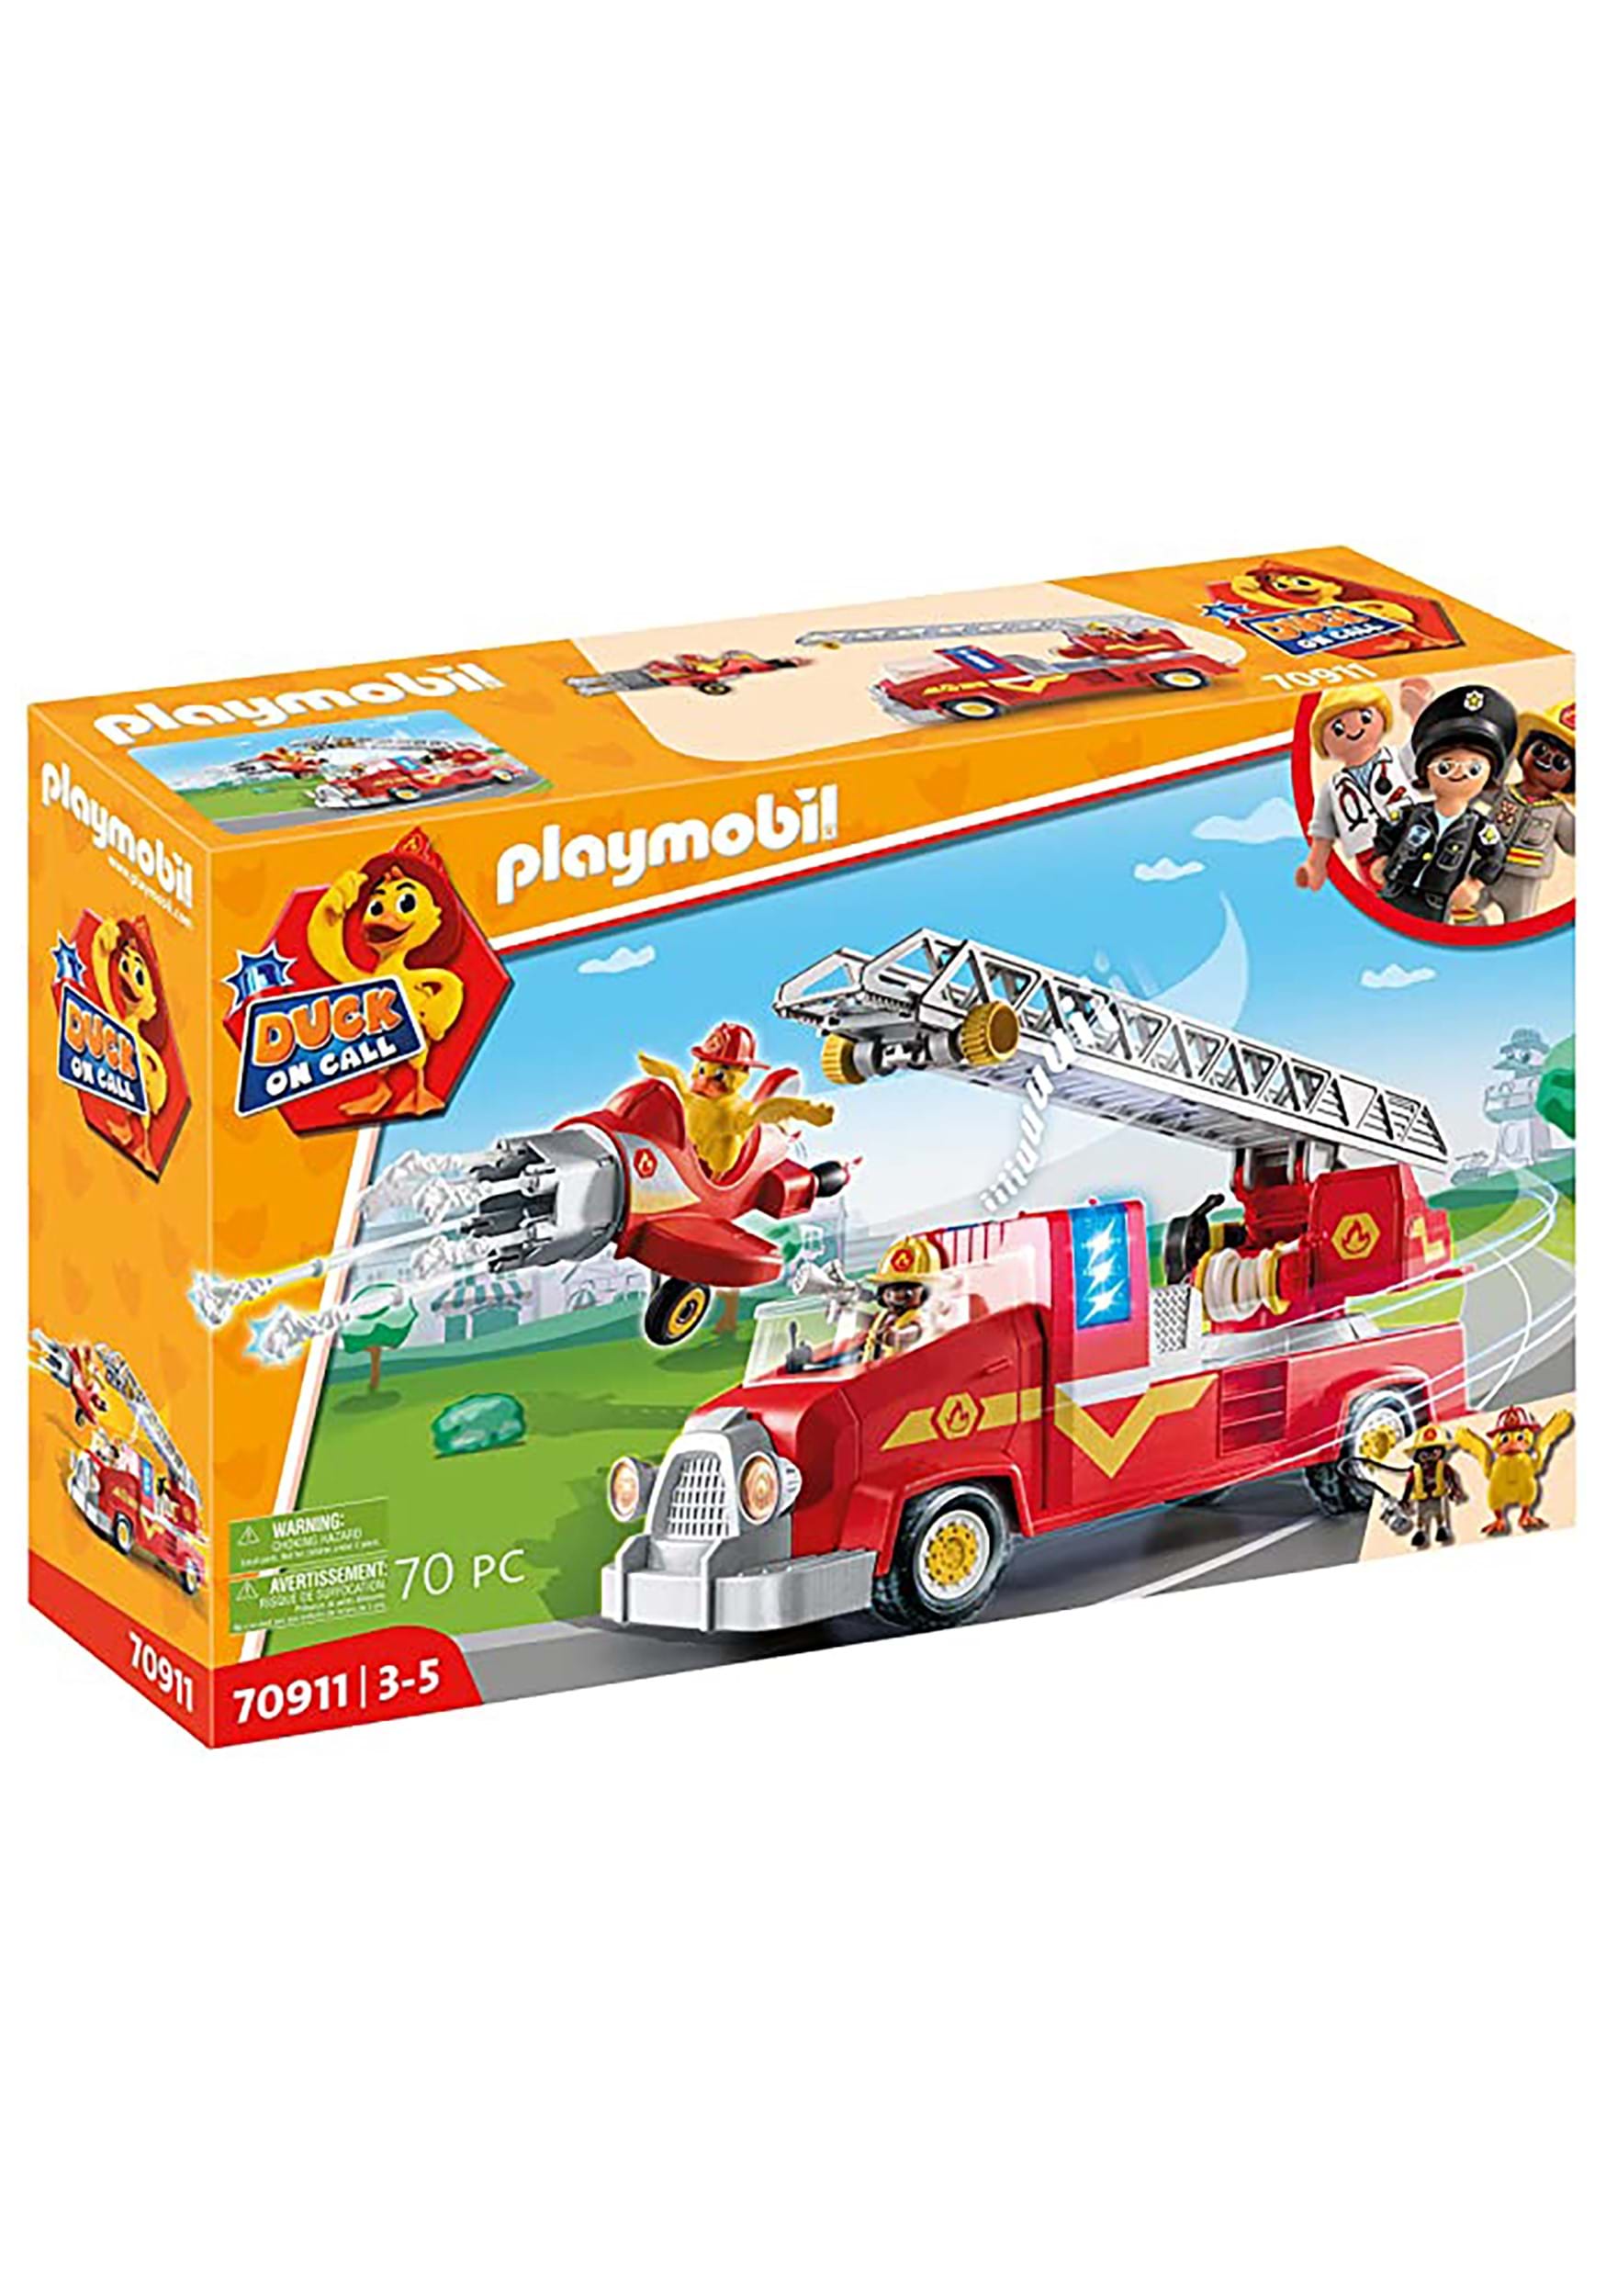 Playmobil Duck on Call Fire Rescue Set